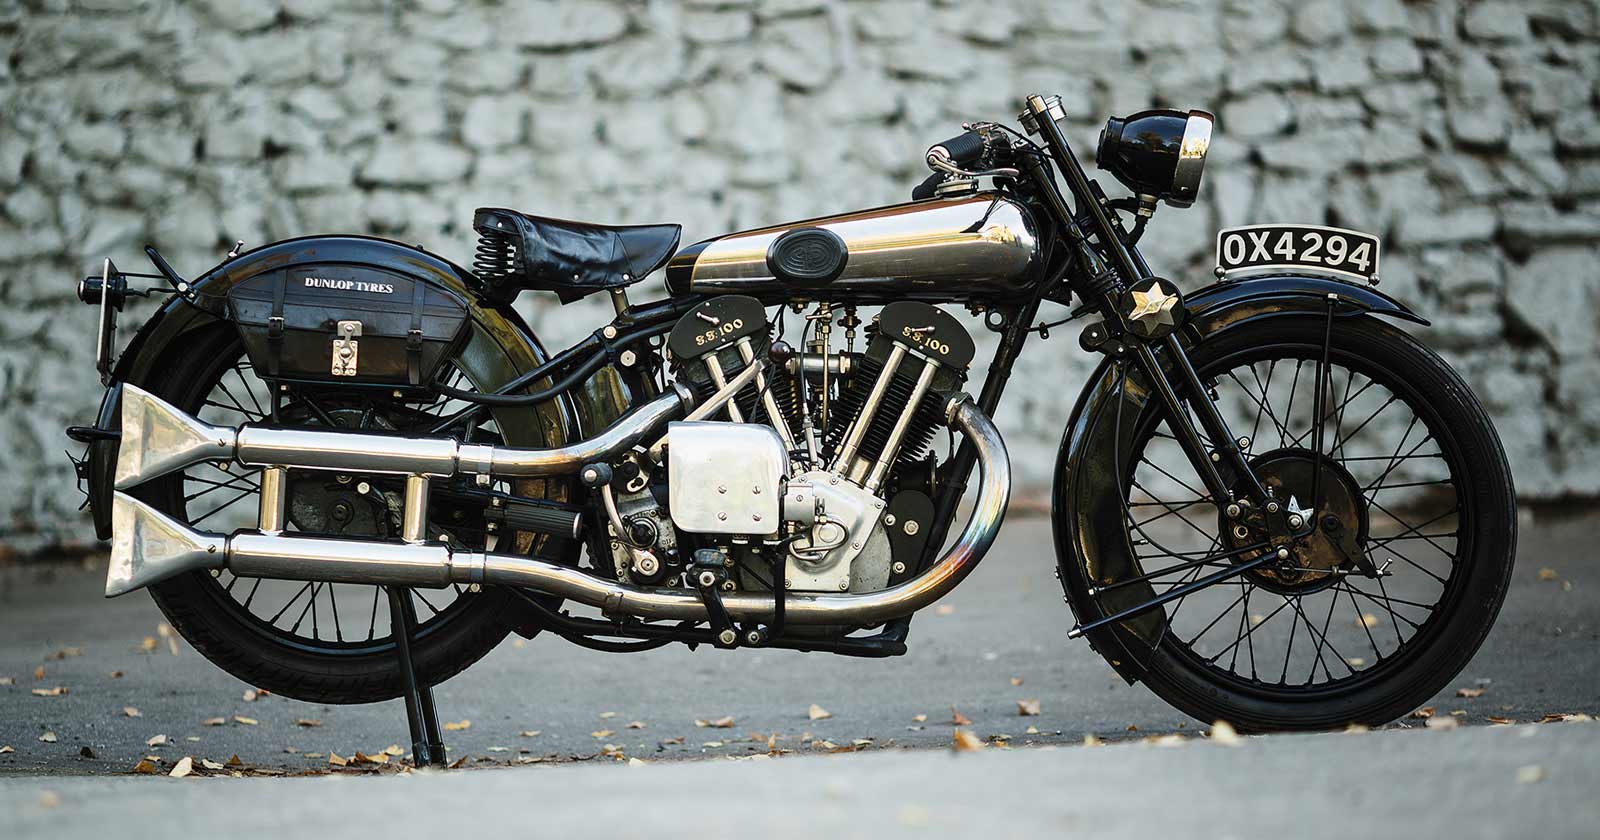 A Brough Superior Ss100 Surfaces In Deepest Russia Bike Exif